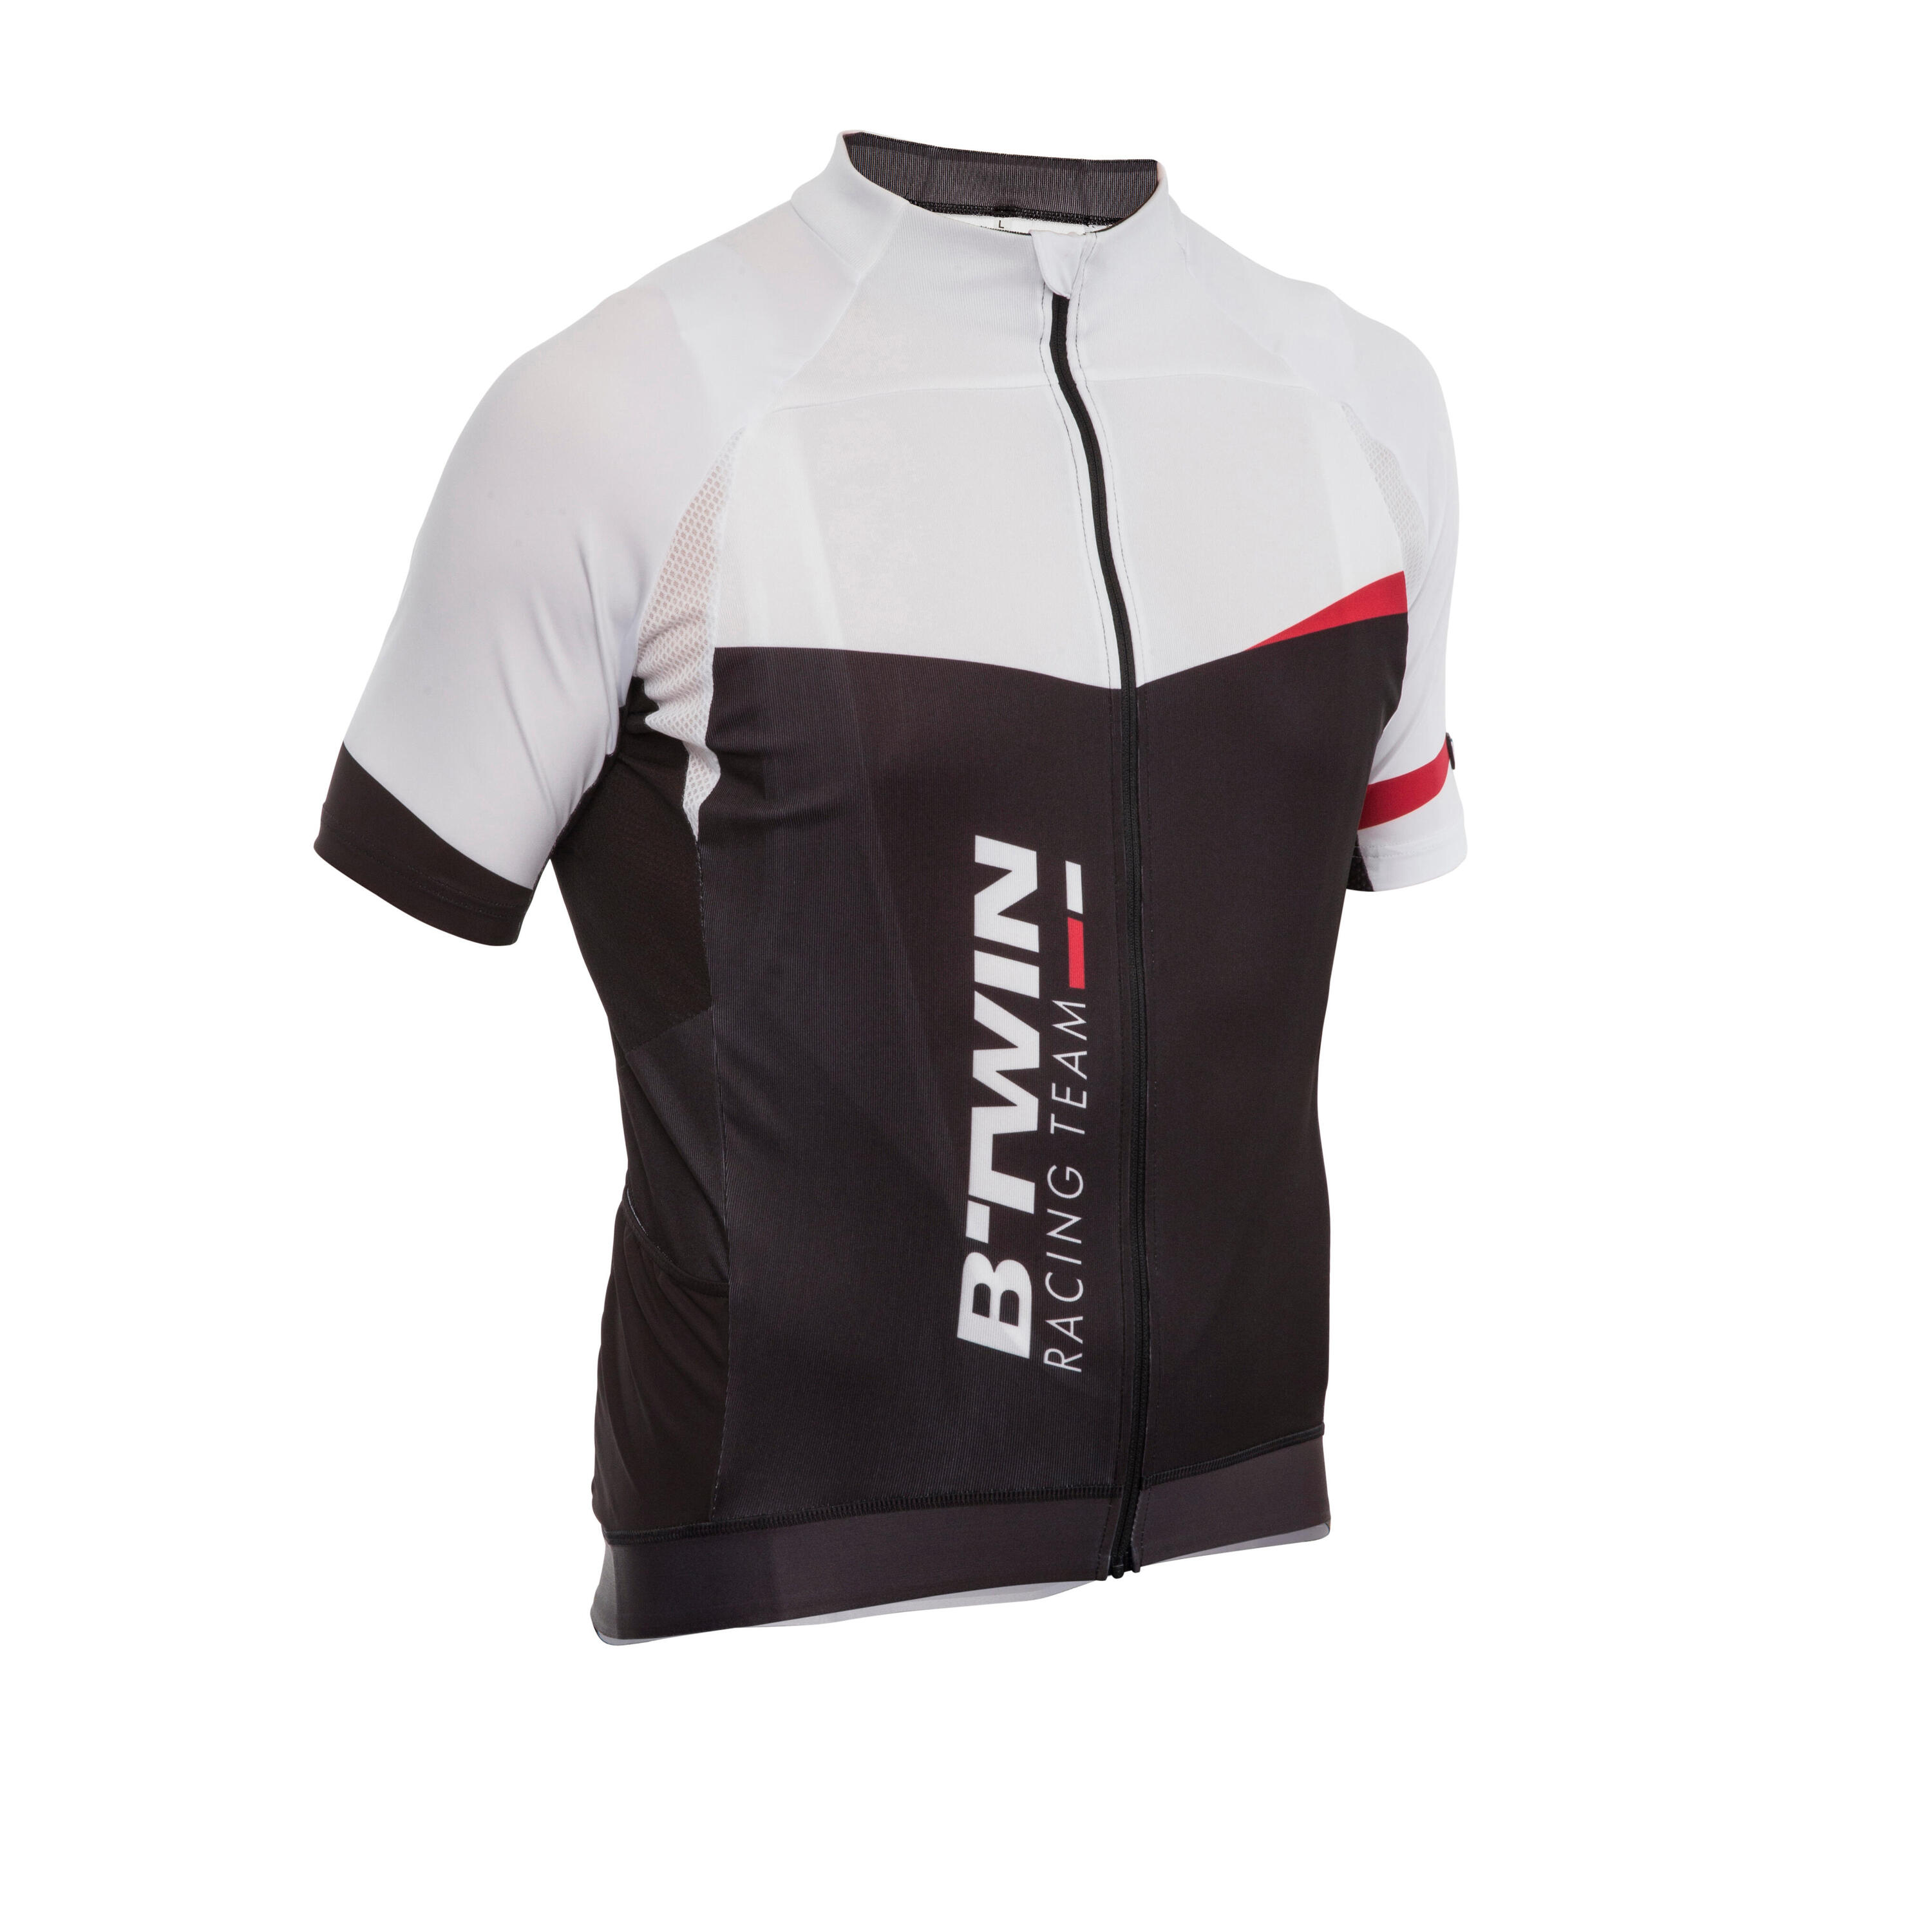 BTWIN 520 SHORT-SLEEVED CYCLING JERSEY - BLACK WHITE